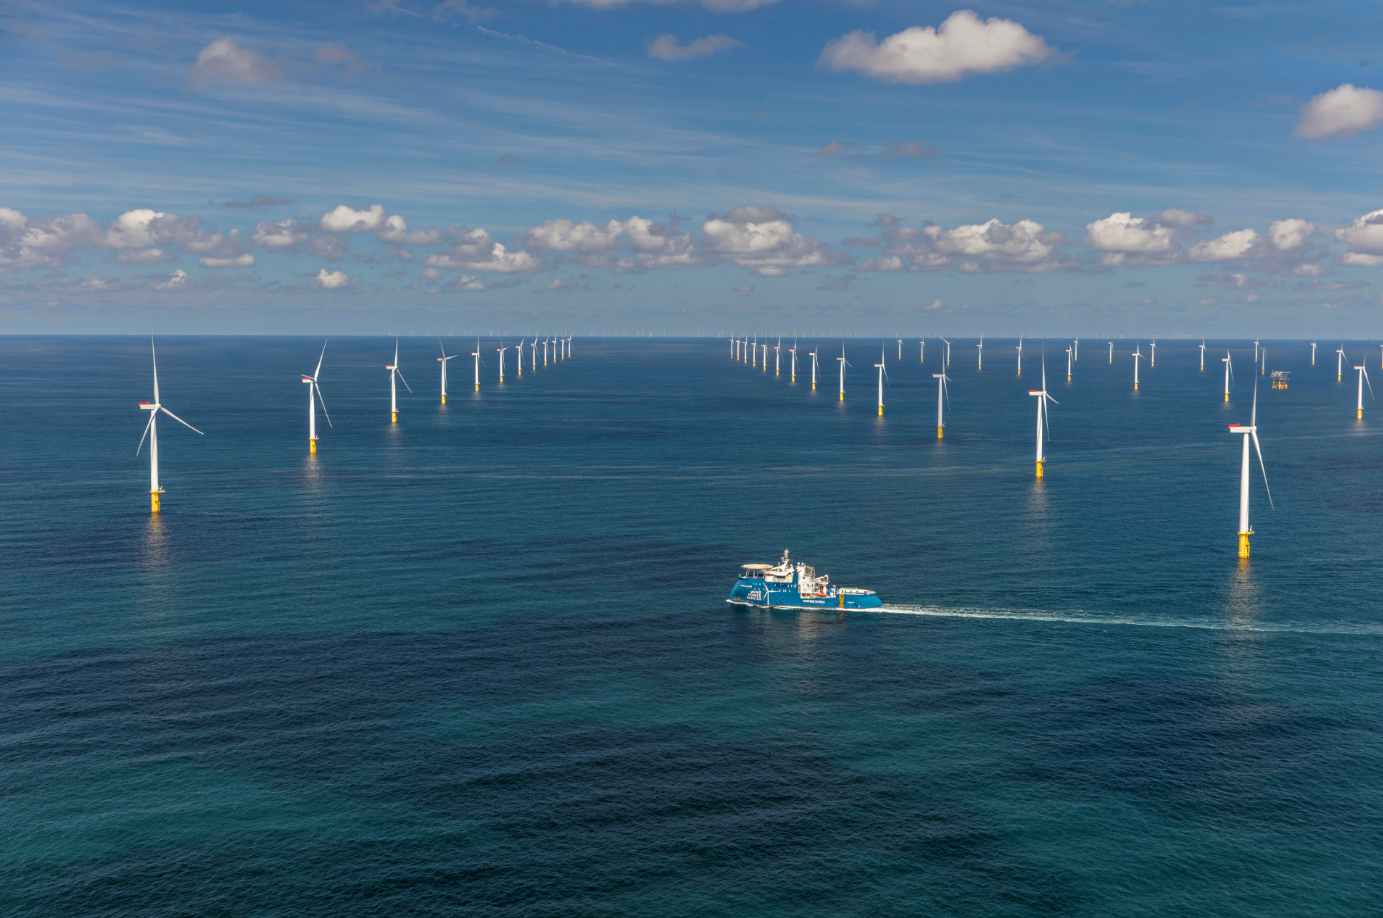 Siemens Gamesa Extends Service Contract for Major Offshore Wind Farm